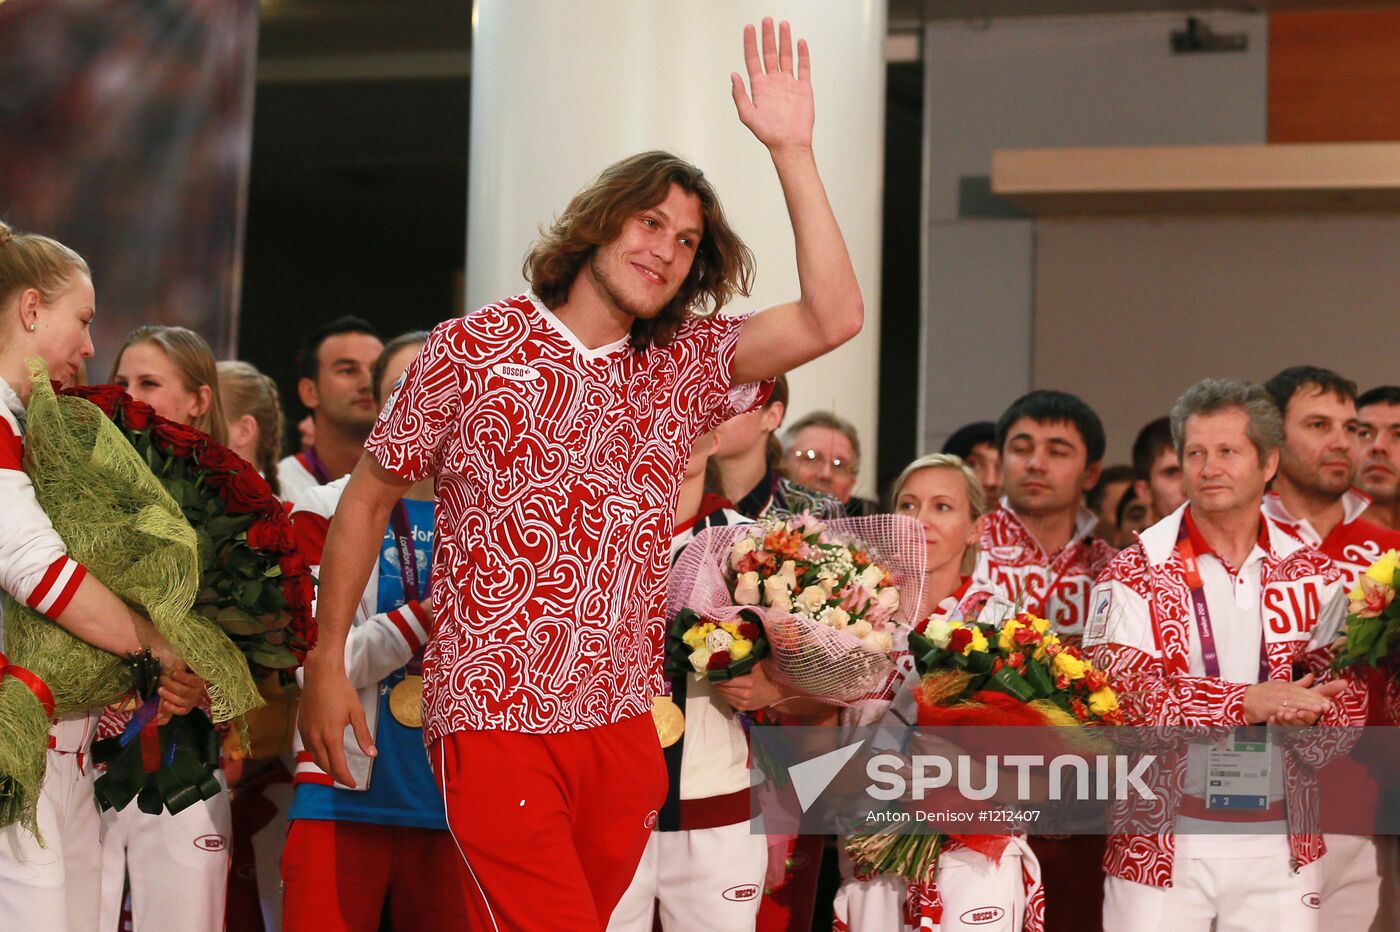 Russian national team arrives home from Olympic Games in London